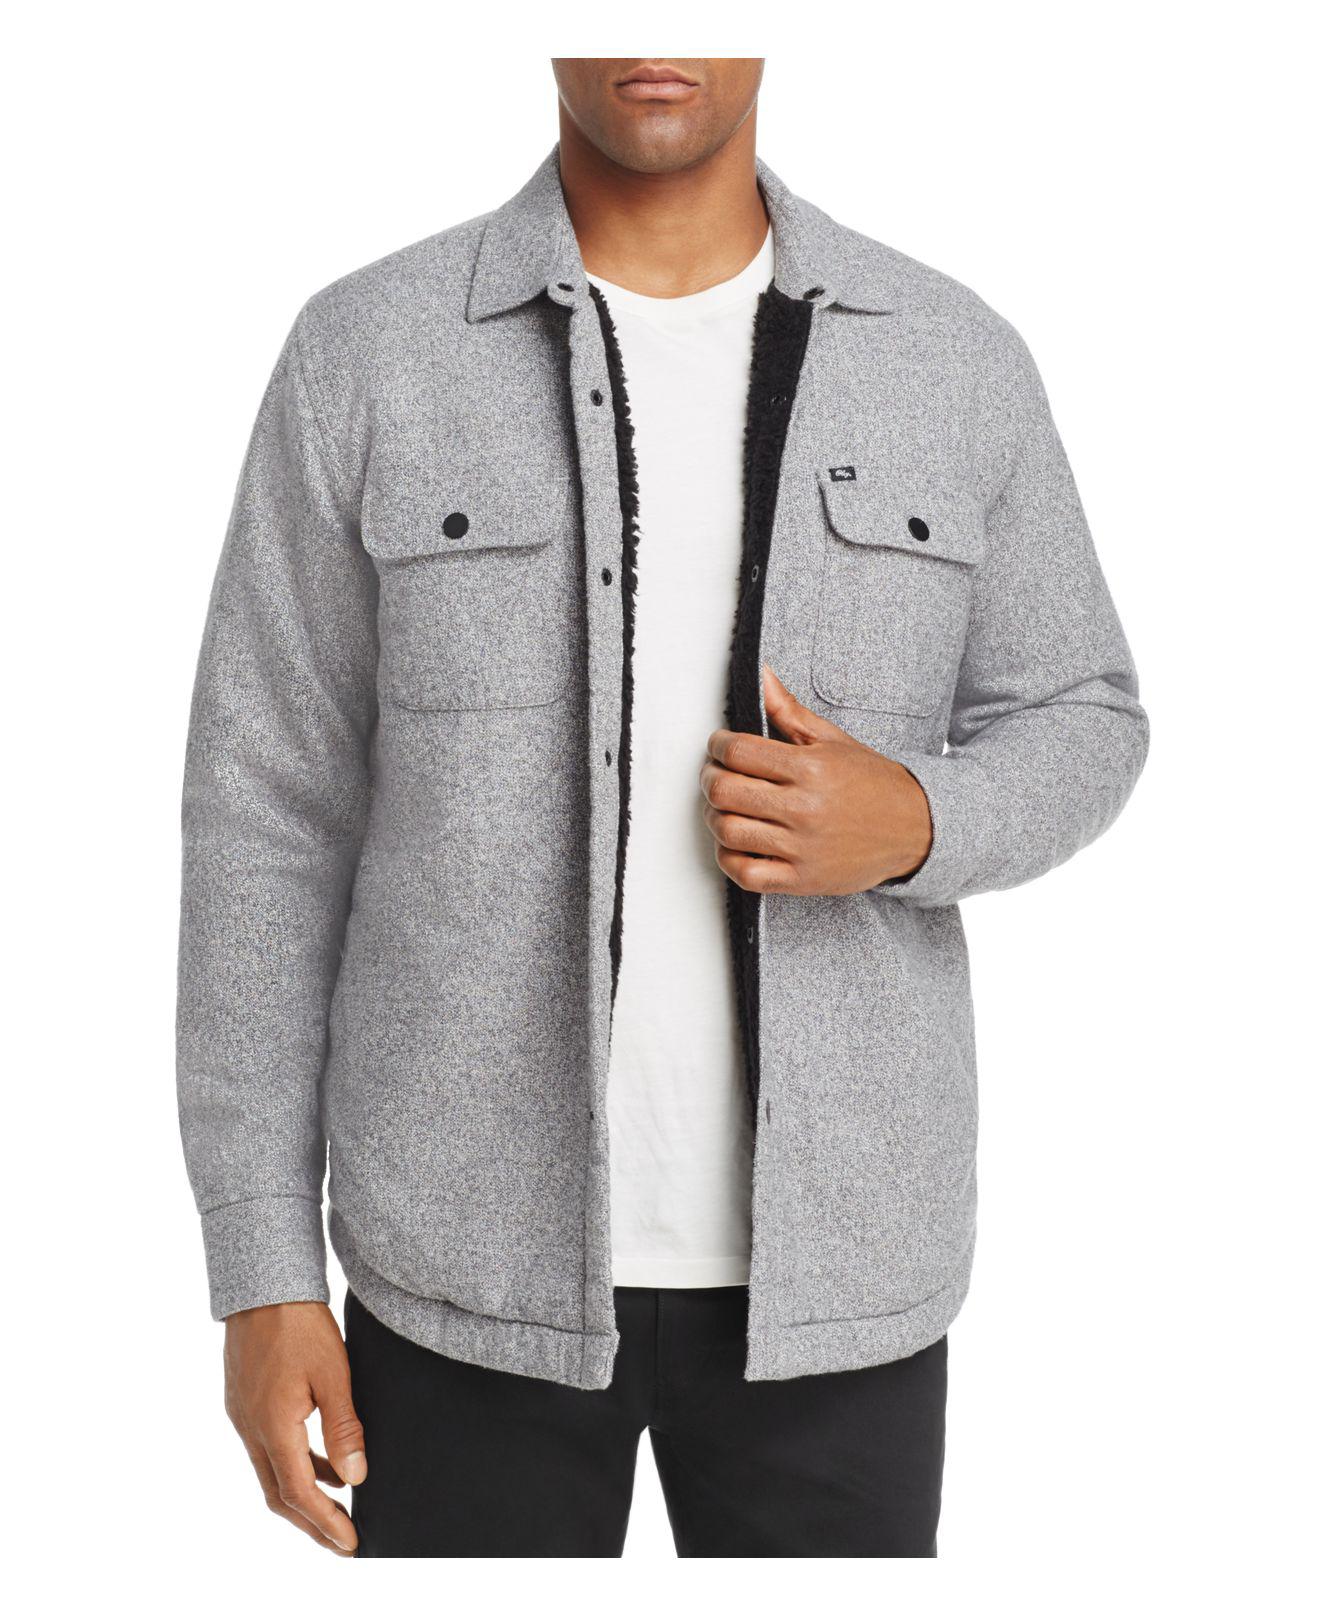 Obey Faux Sherpa-lined Shirt Jacket in Gray for Men - Lyst